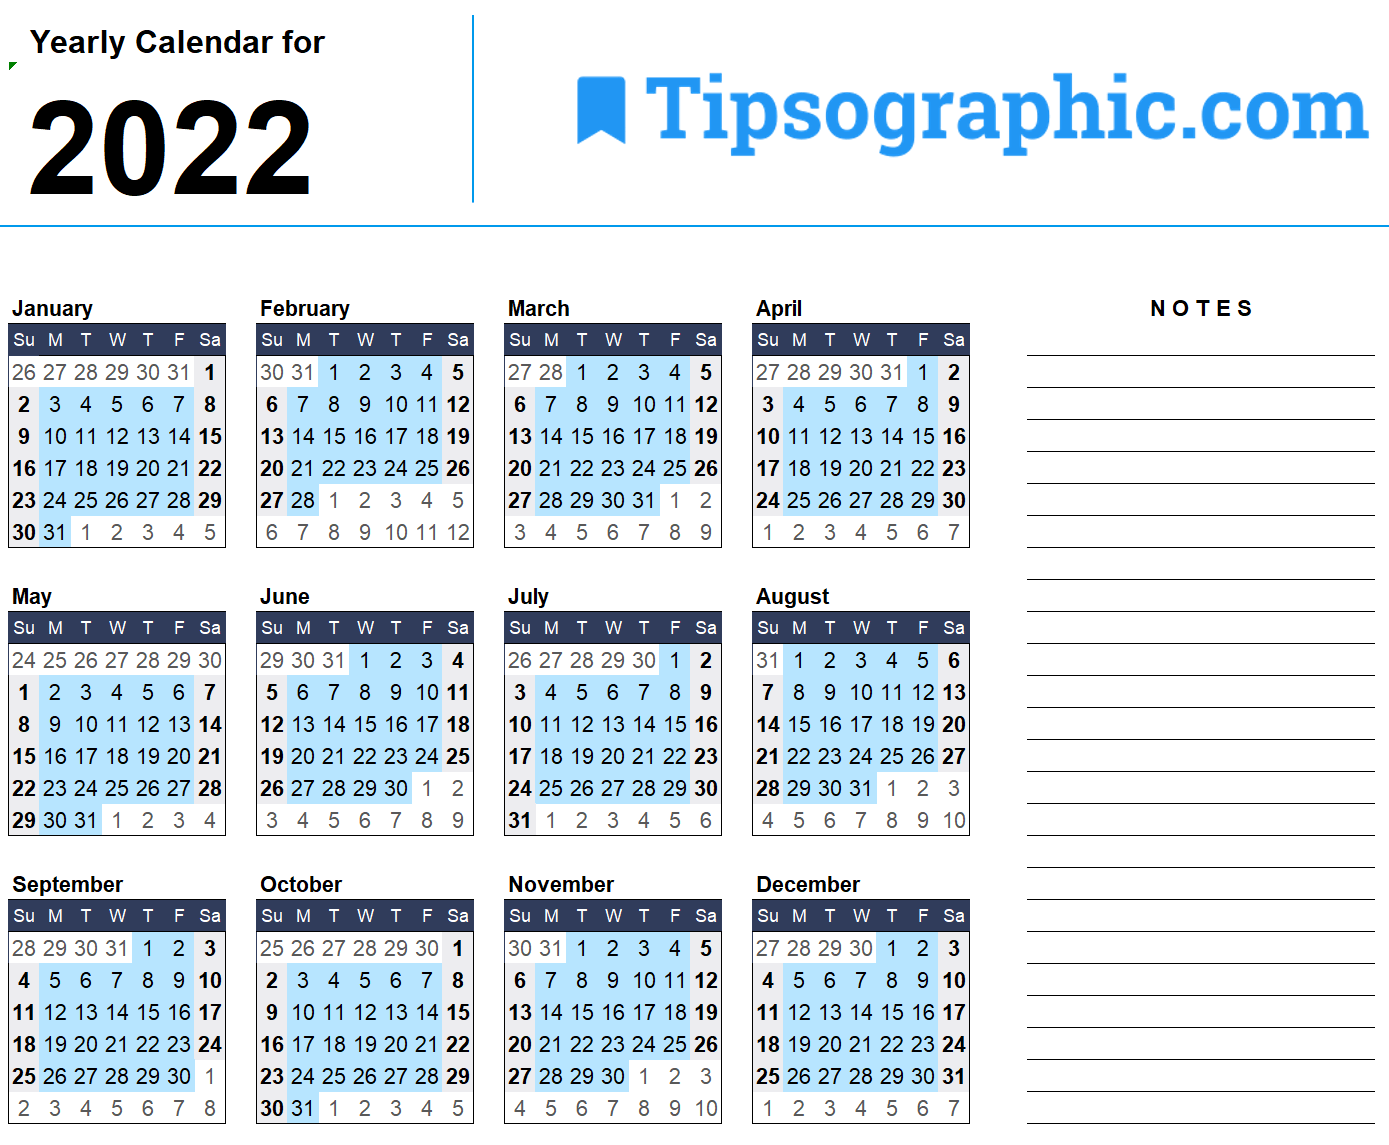 Download The 2022 Yearly Calendar Free Download